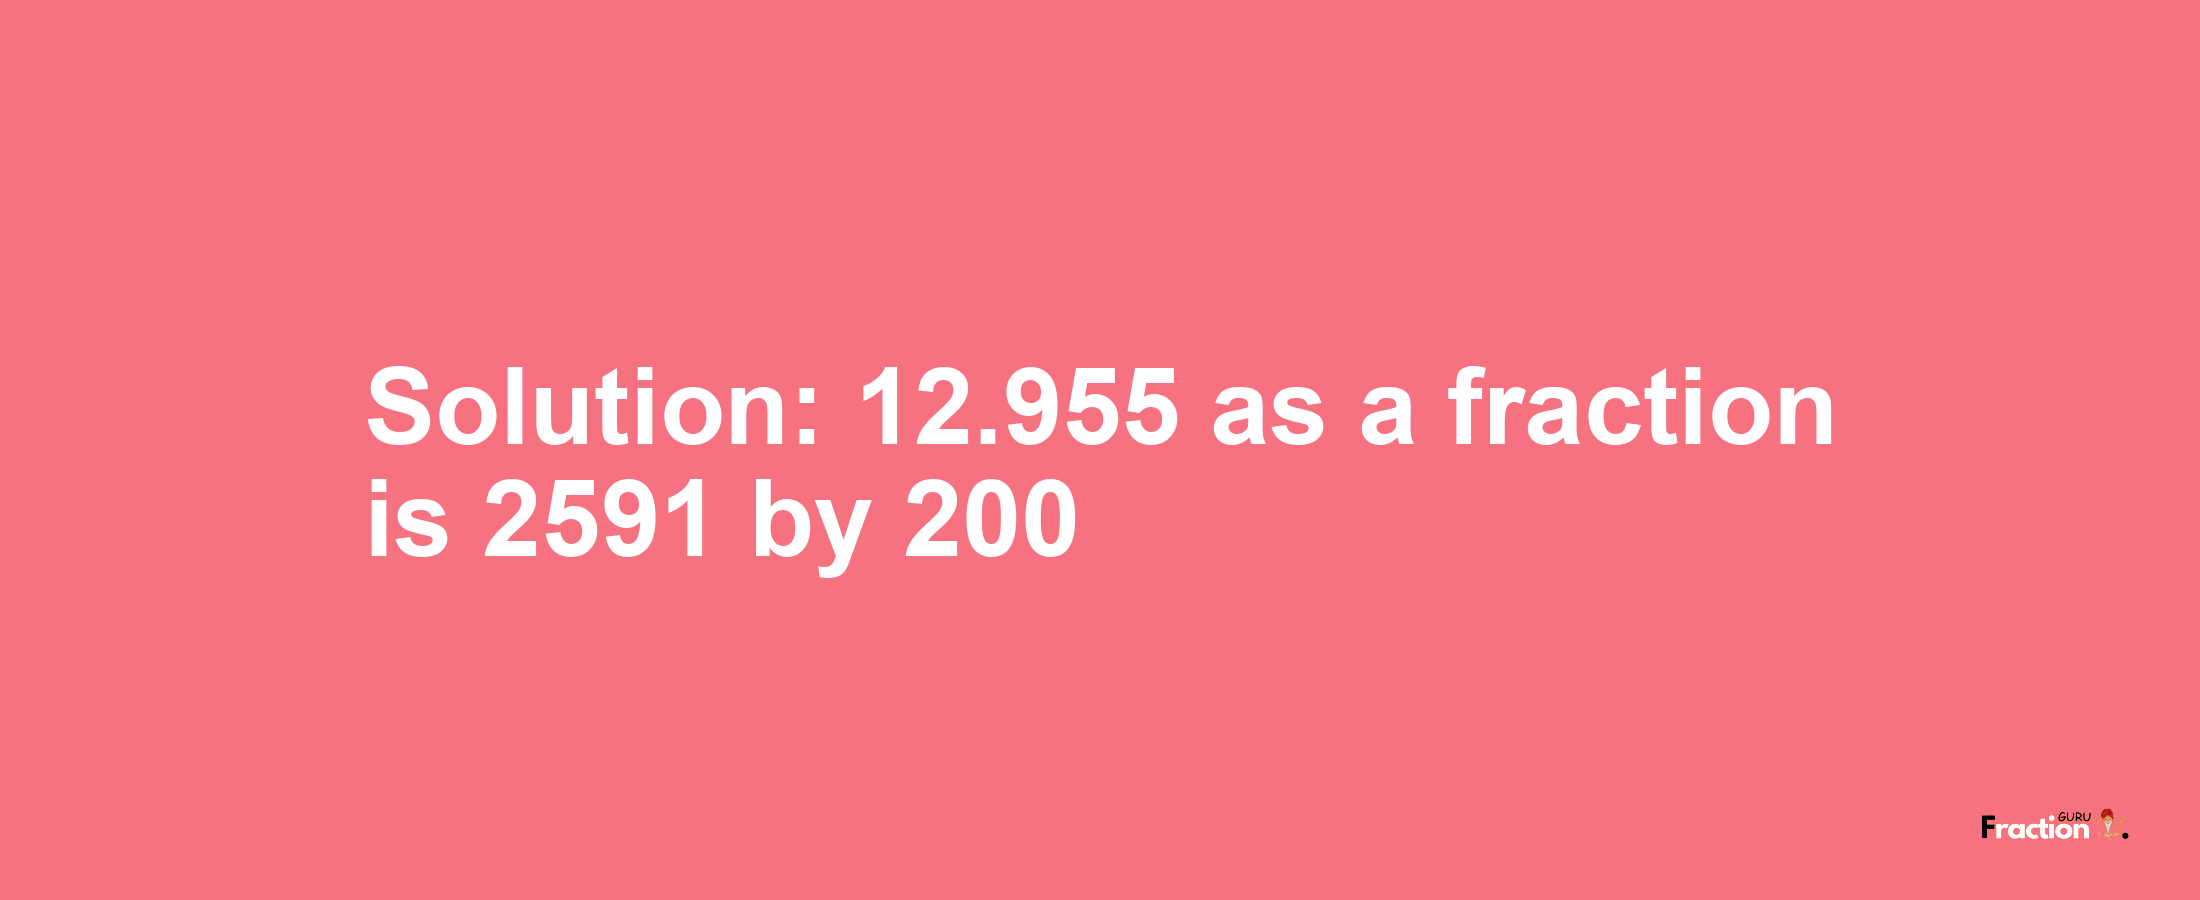 Solution:12.955 as a fraction is 2591/200